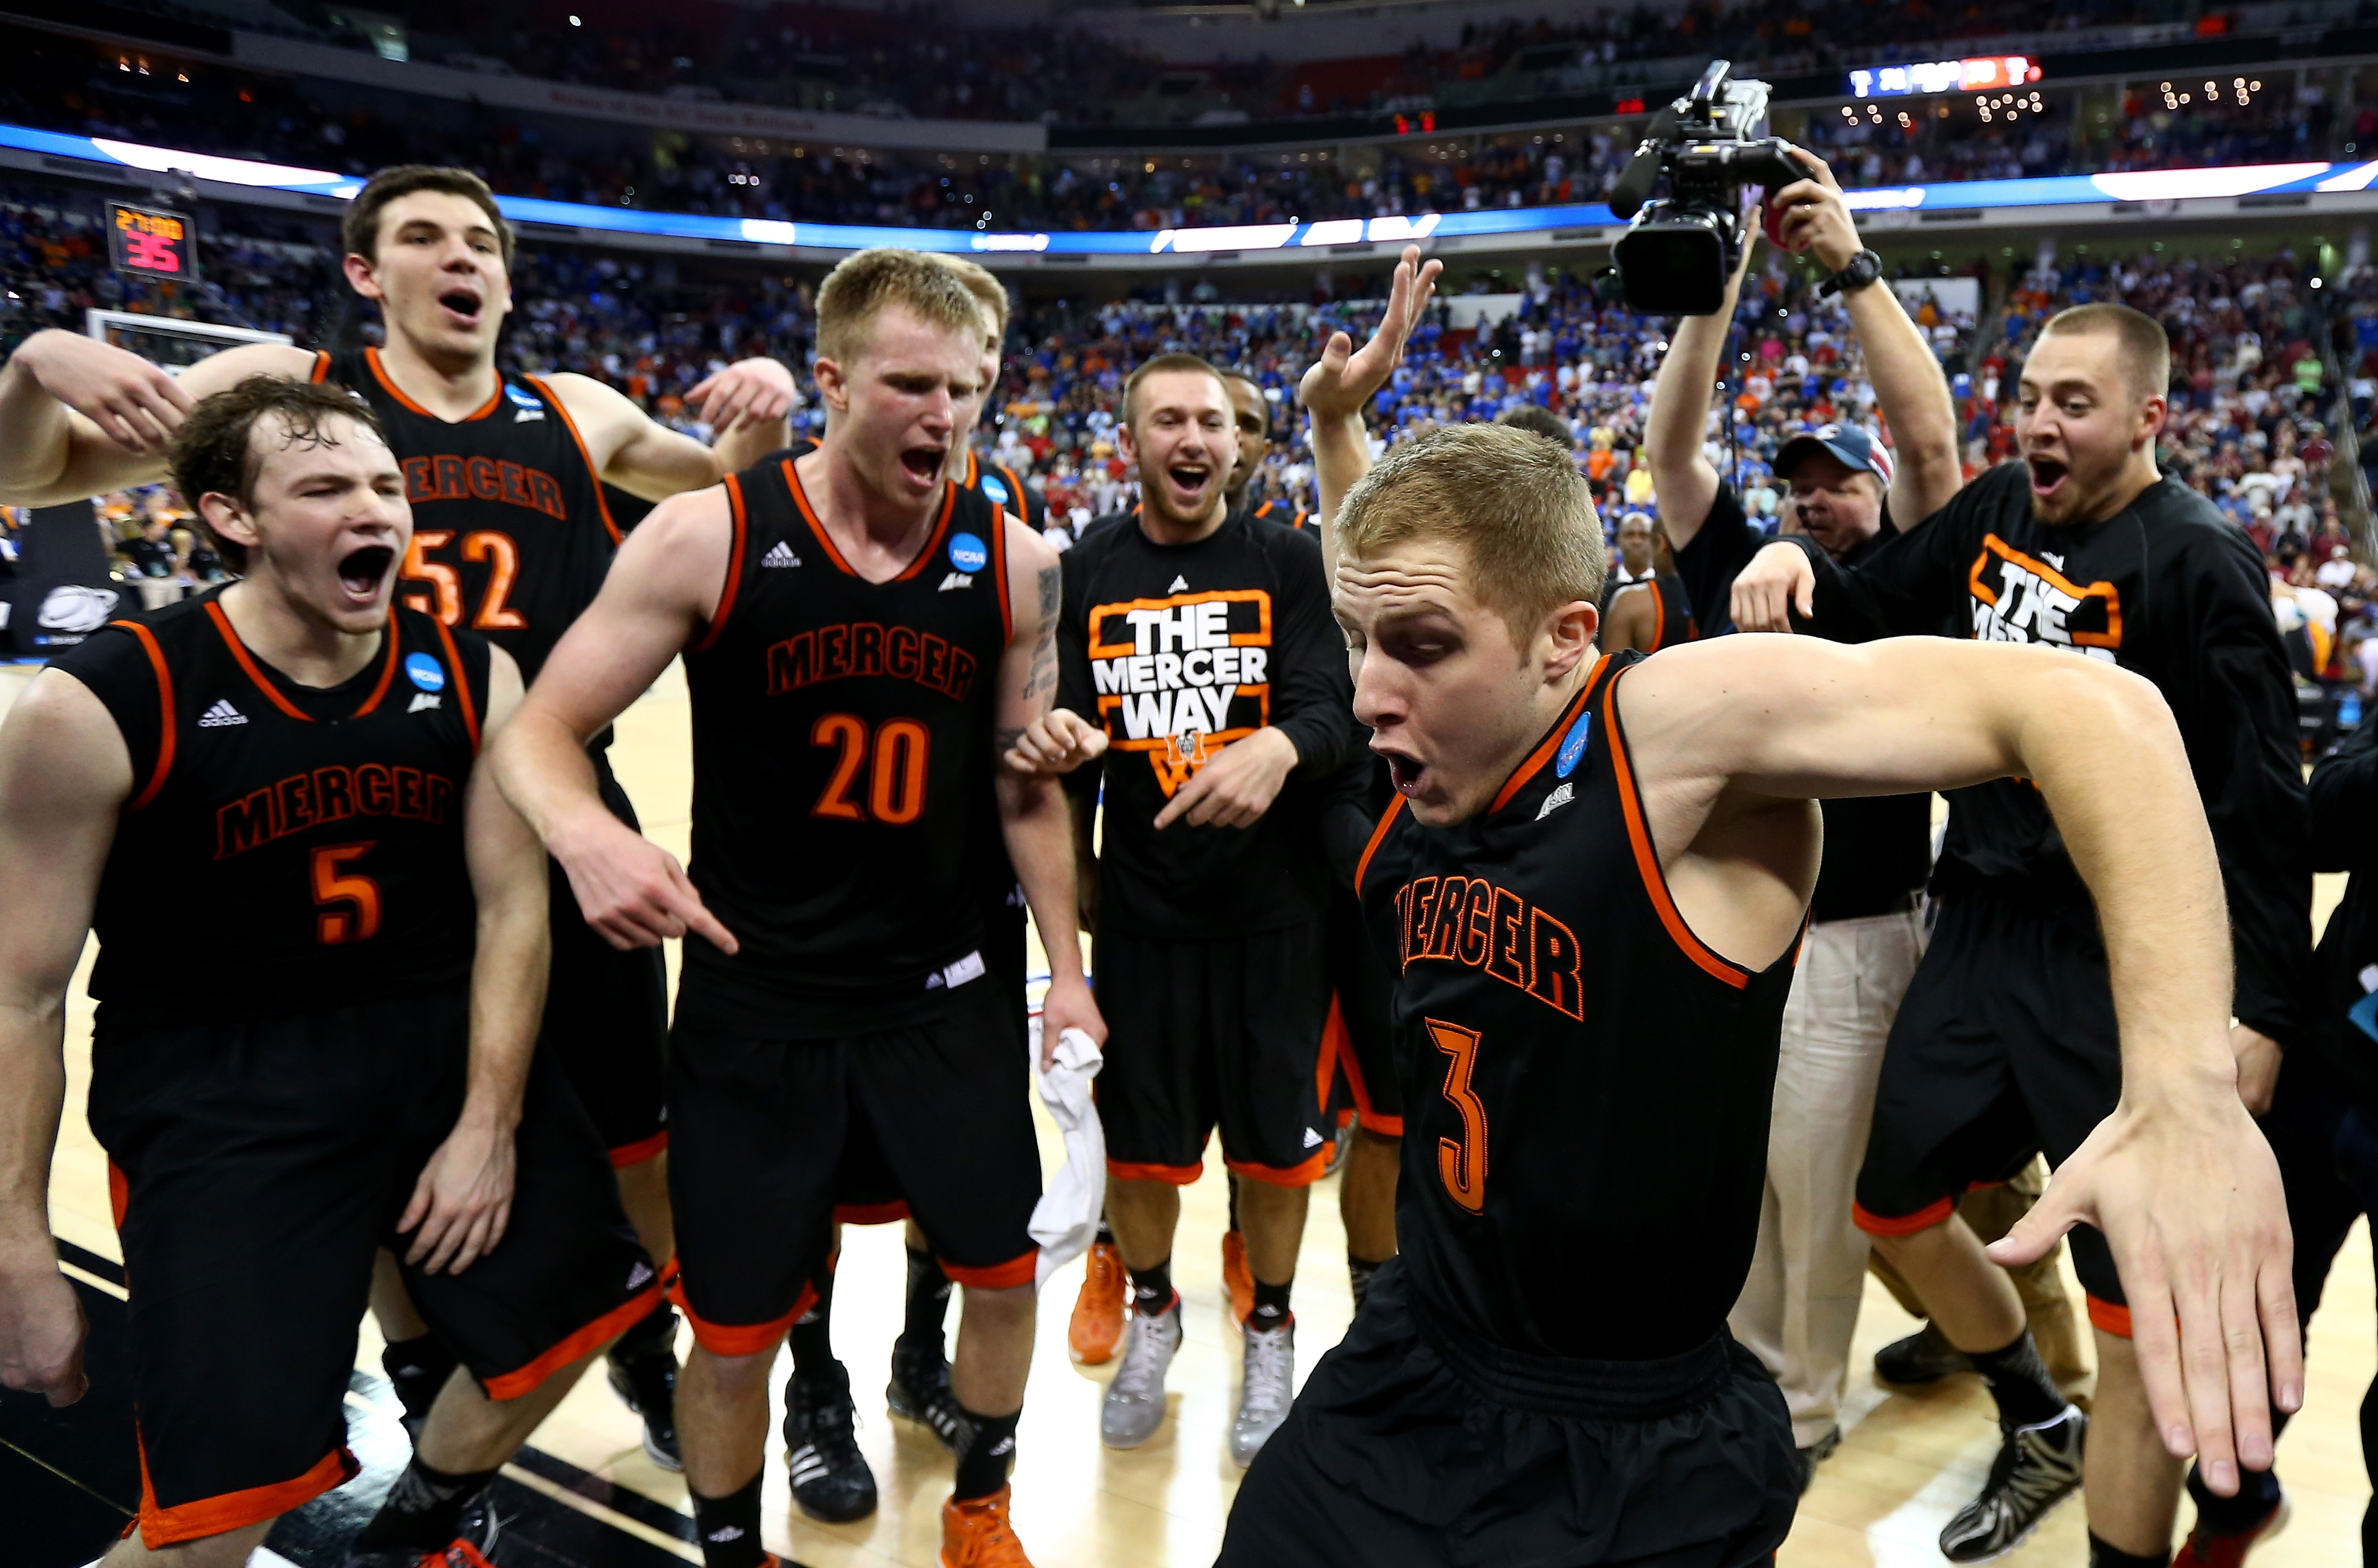 You&amp;rsquo;re not going to be a billionaire, so enjoy these great photos of first-round March Madness upsets